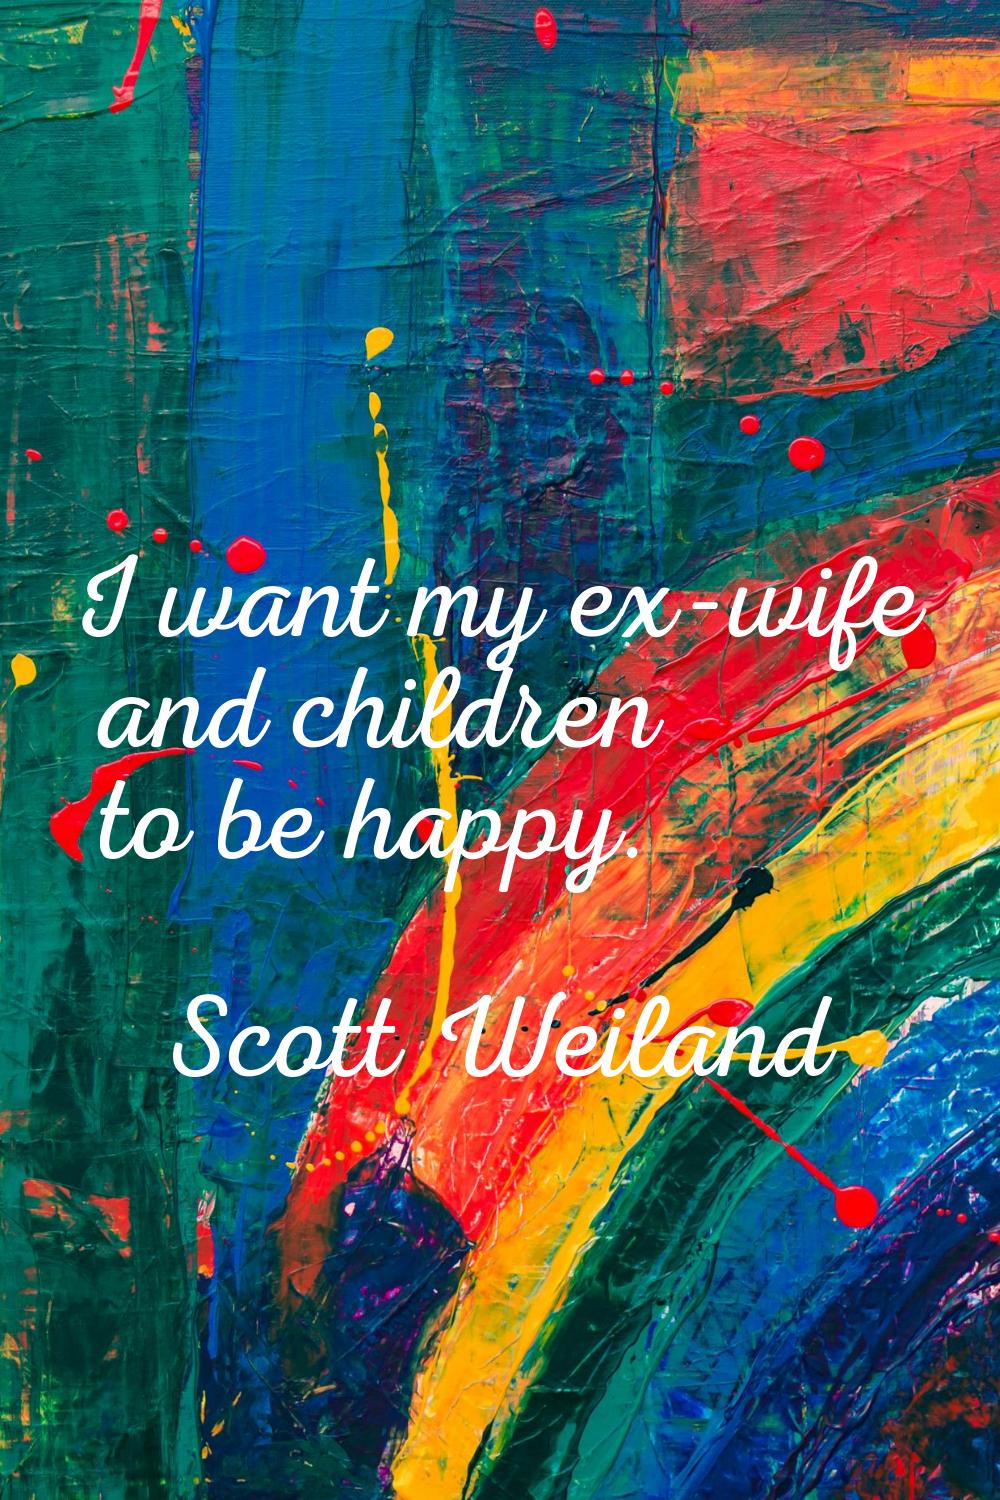 I want my ex-wife and children to be happy.